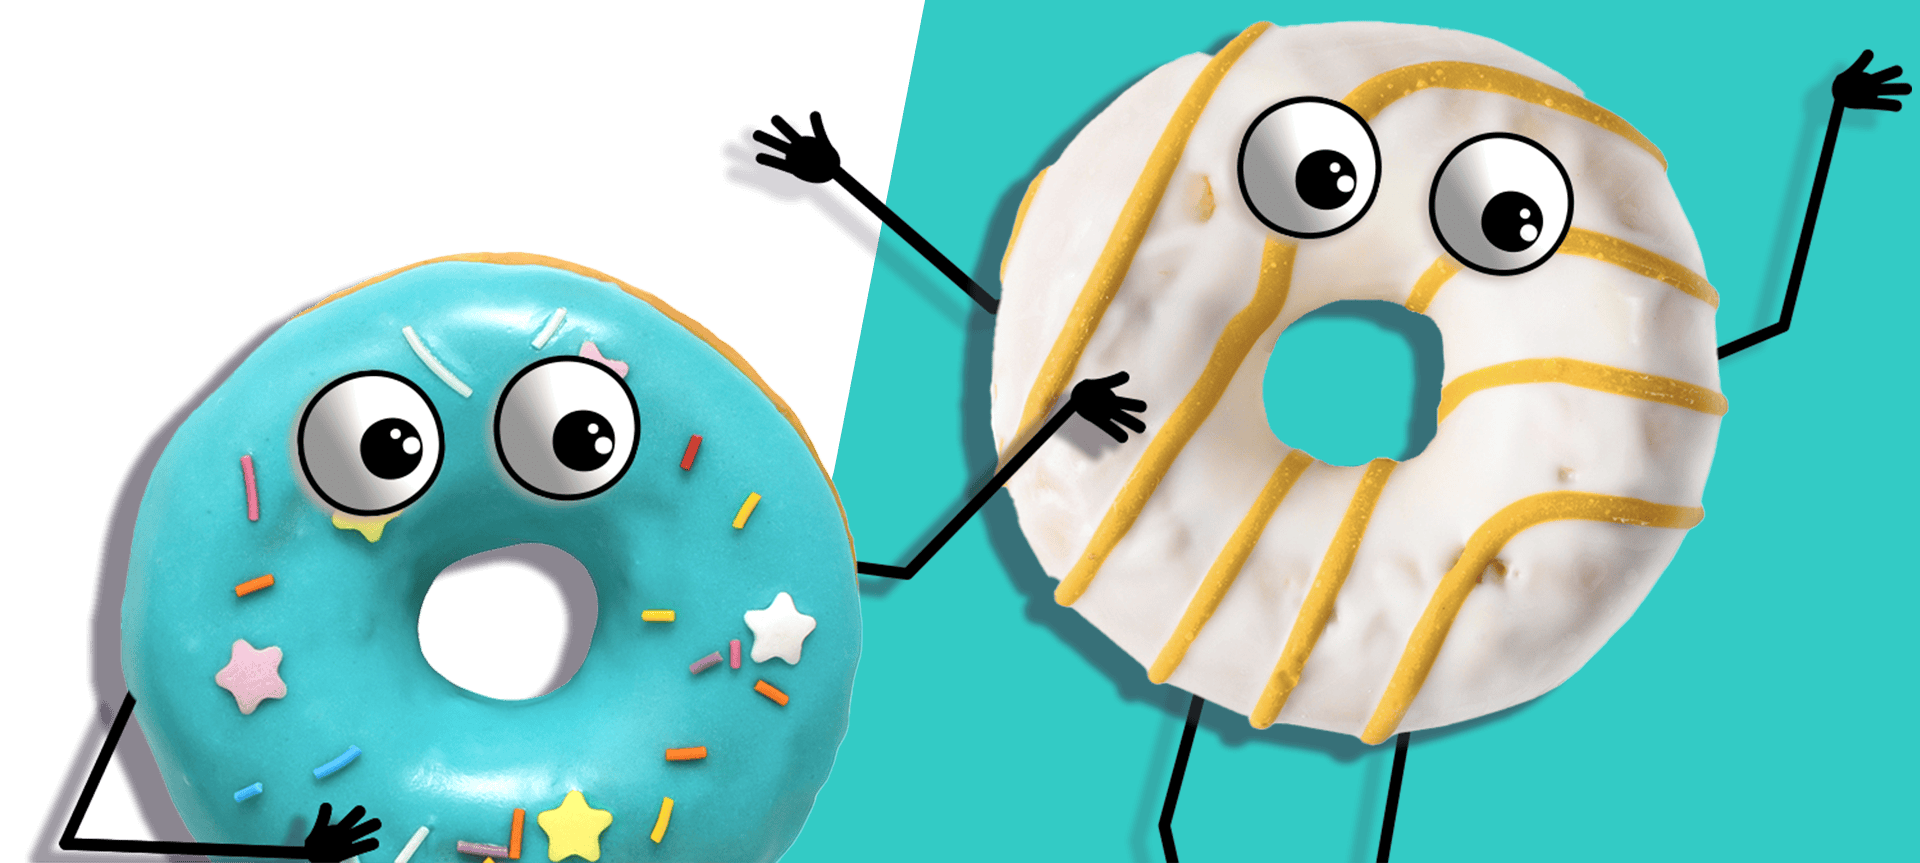 Donuts with faces